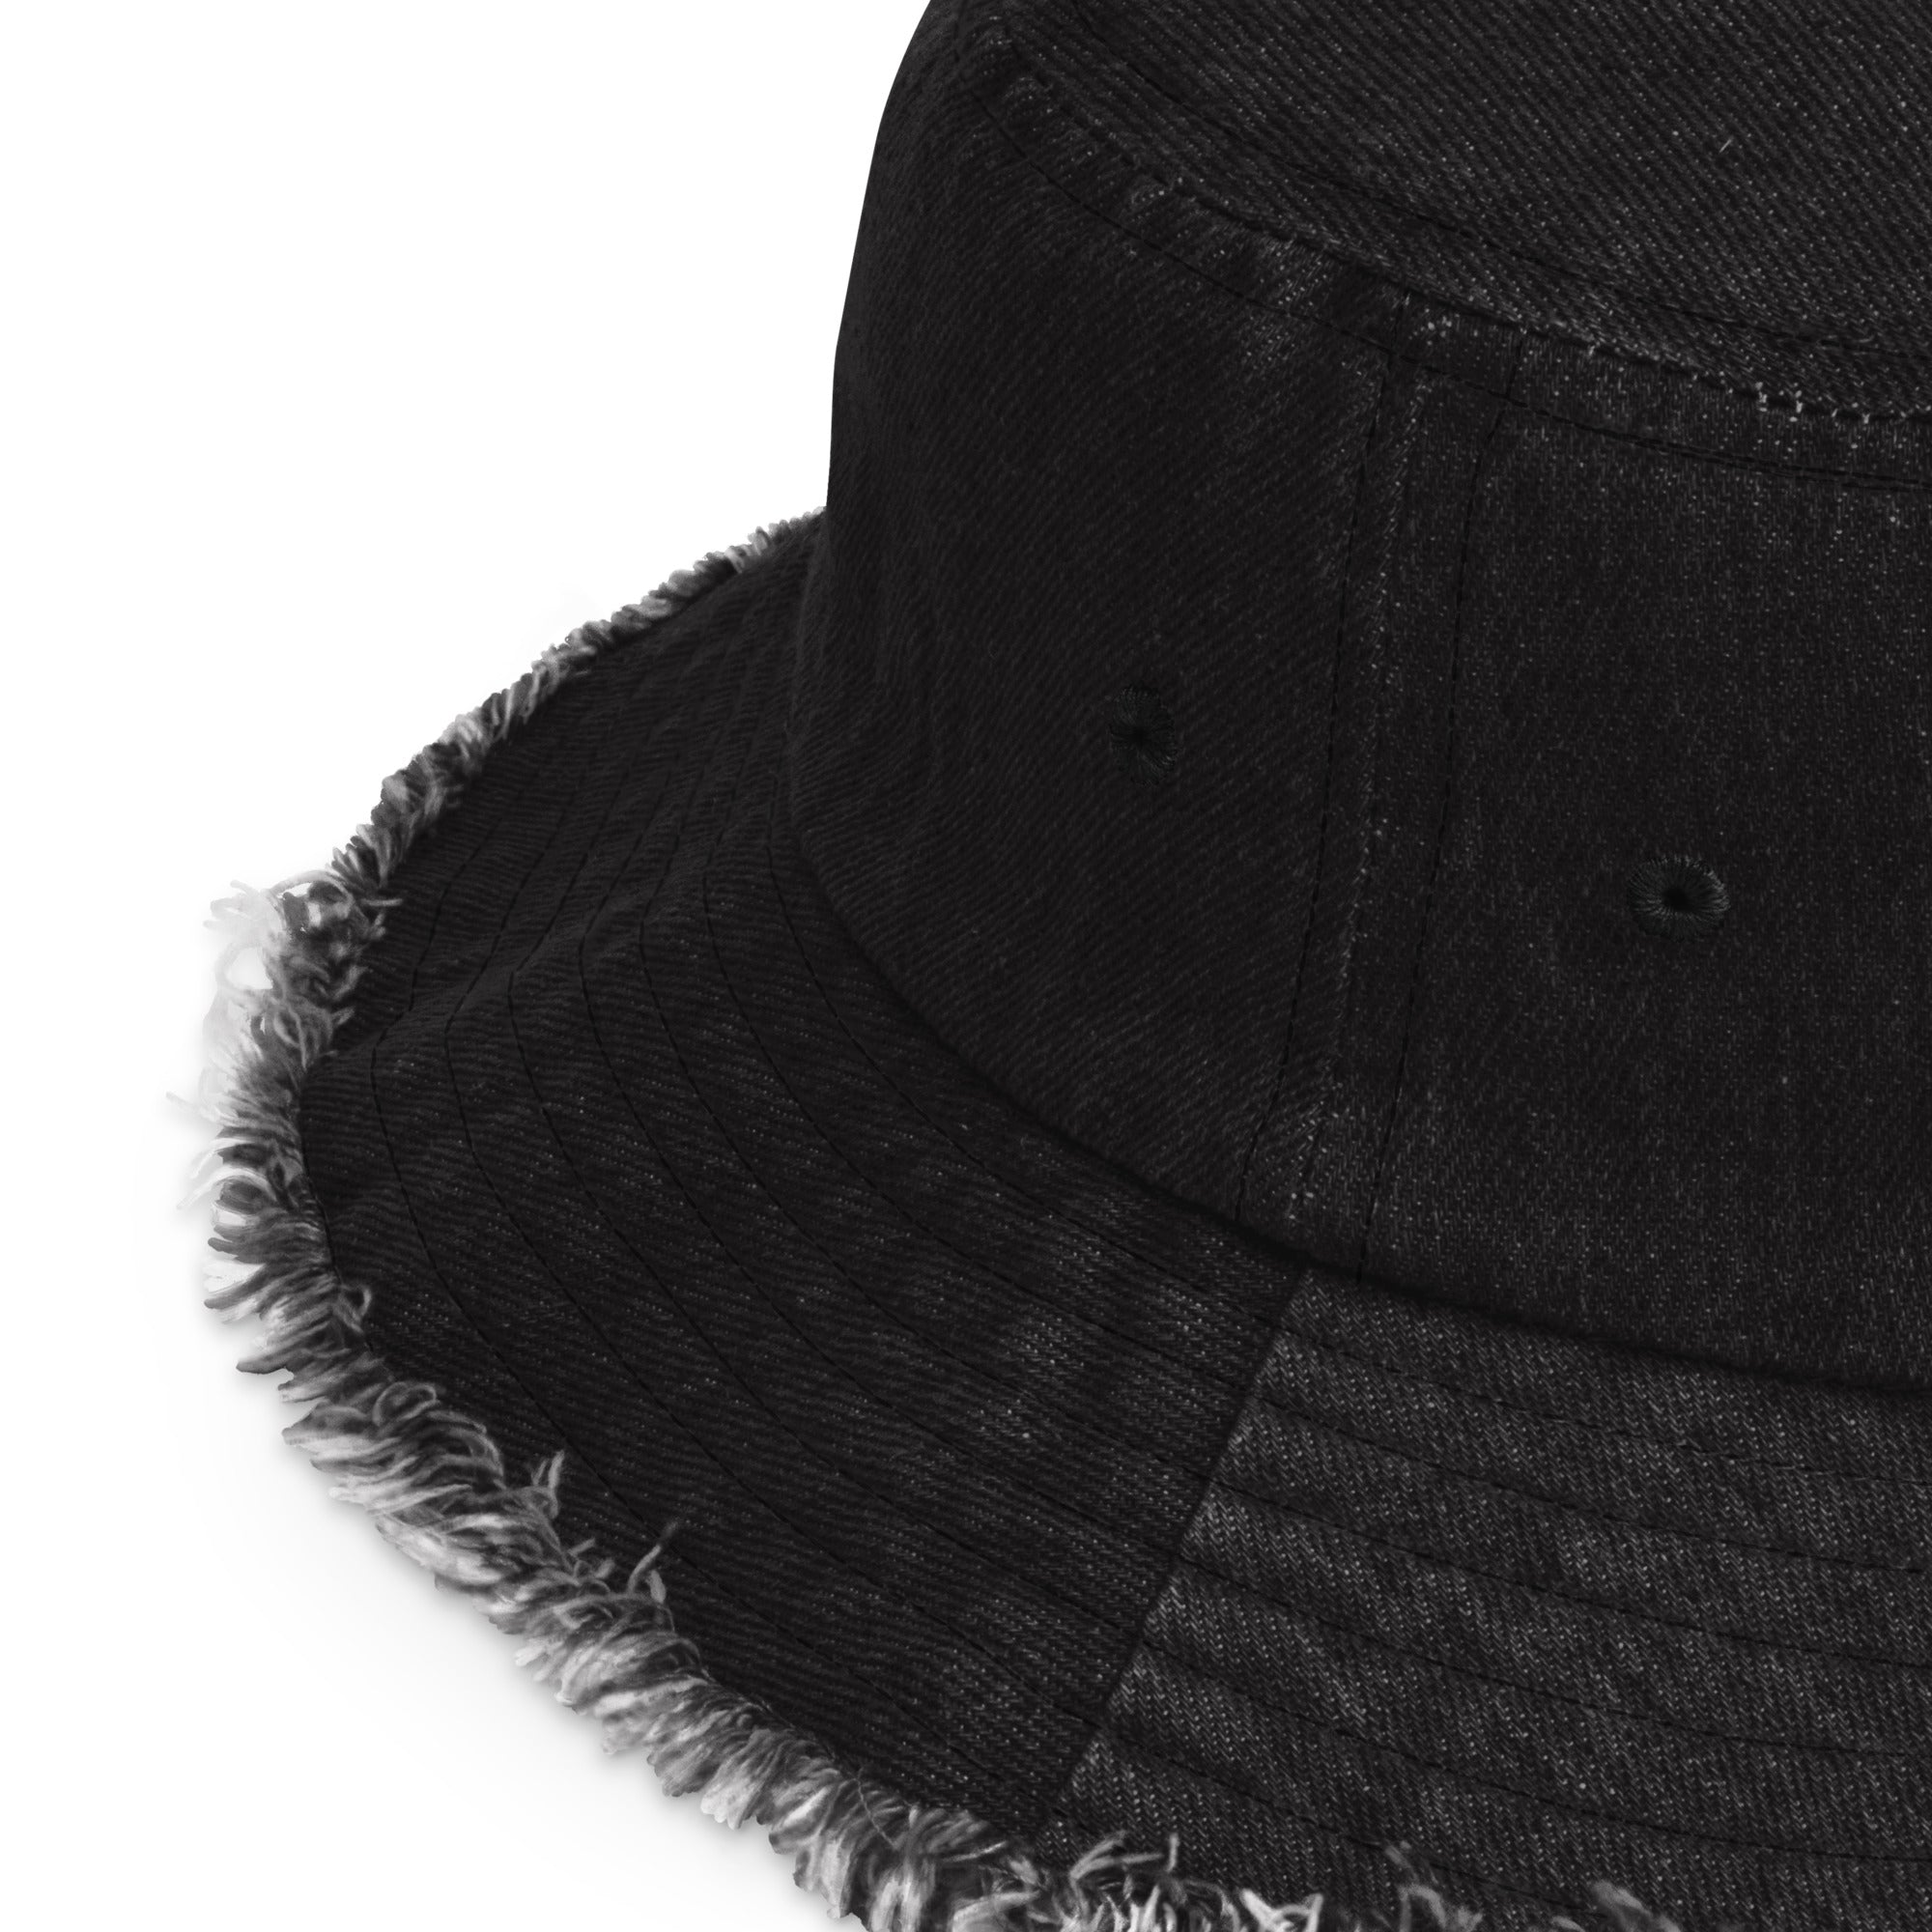 Self Love! Personalize it with your own! Distressed denim bucket hat